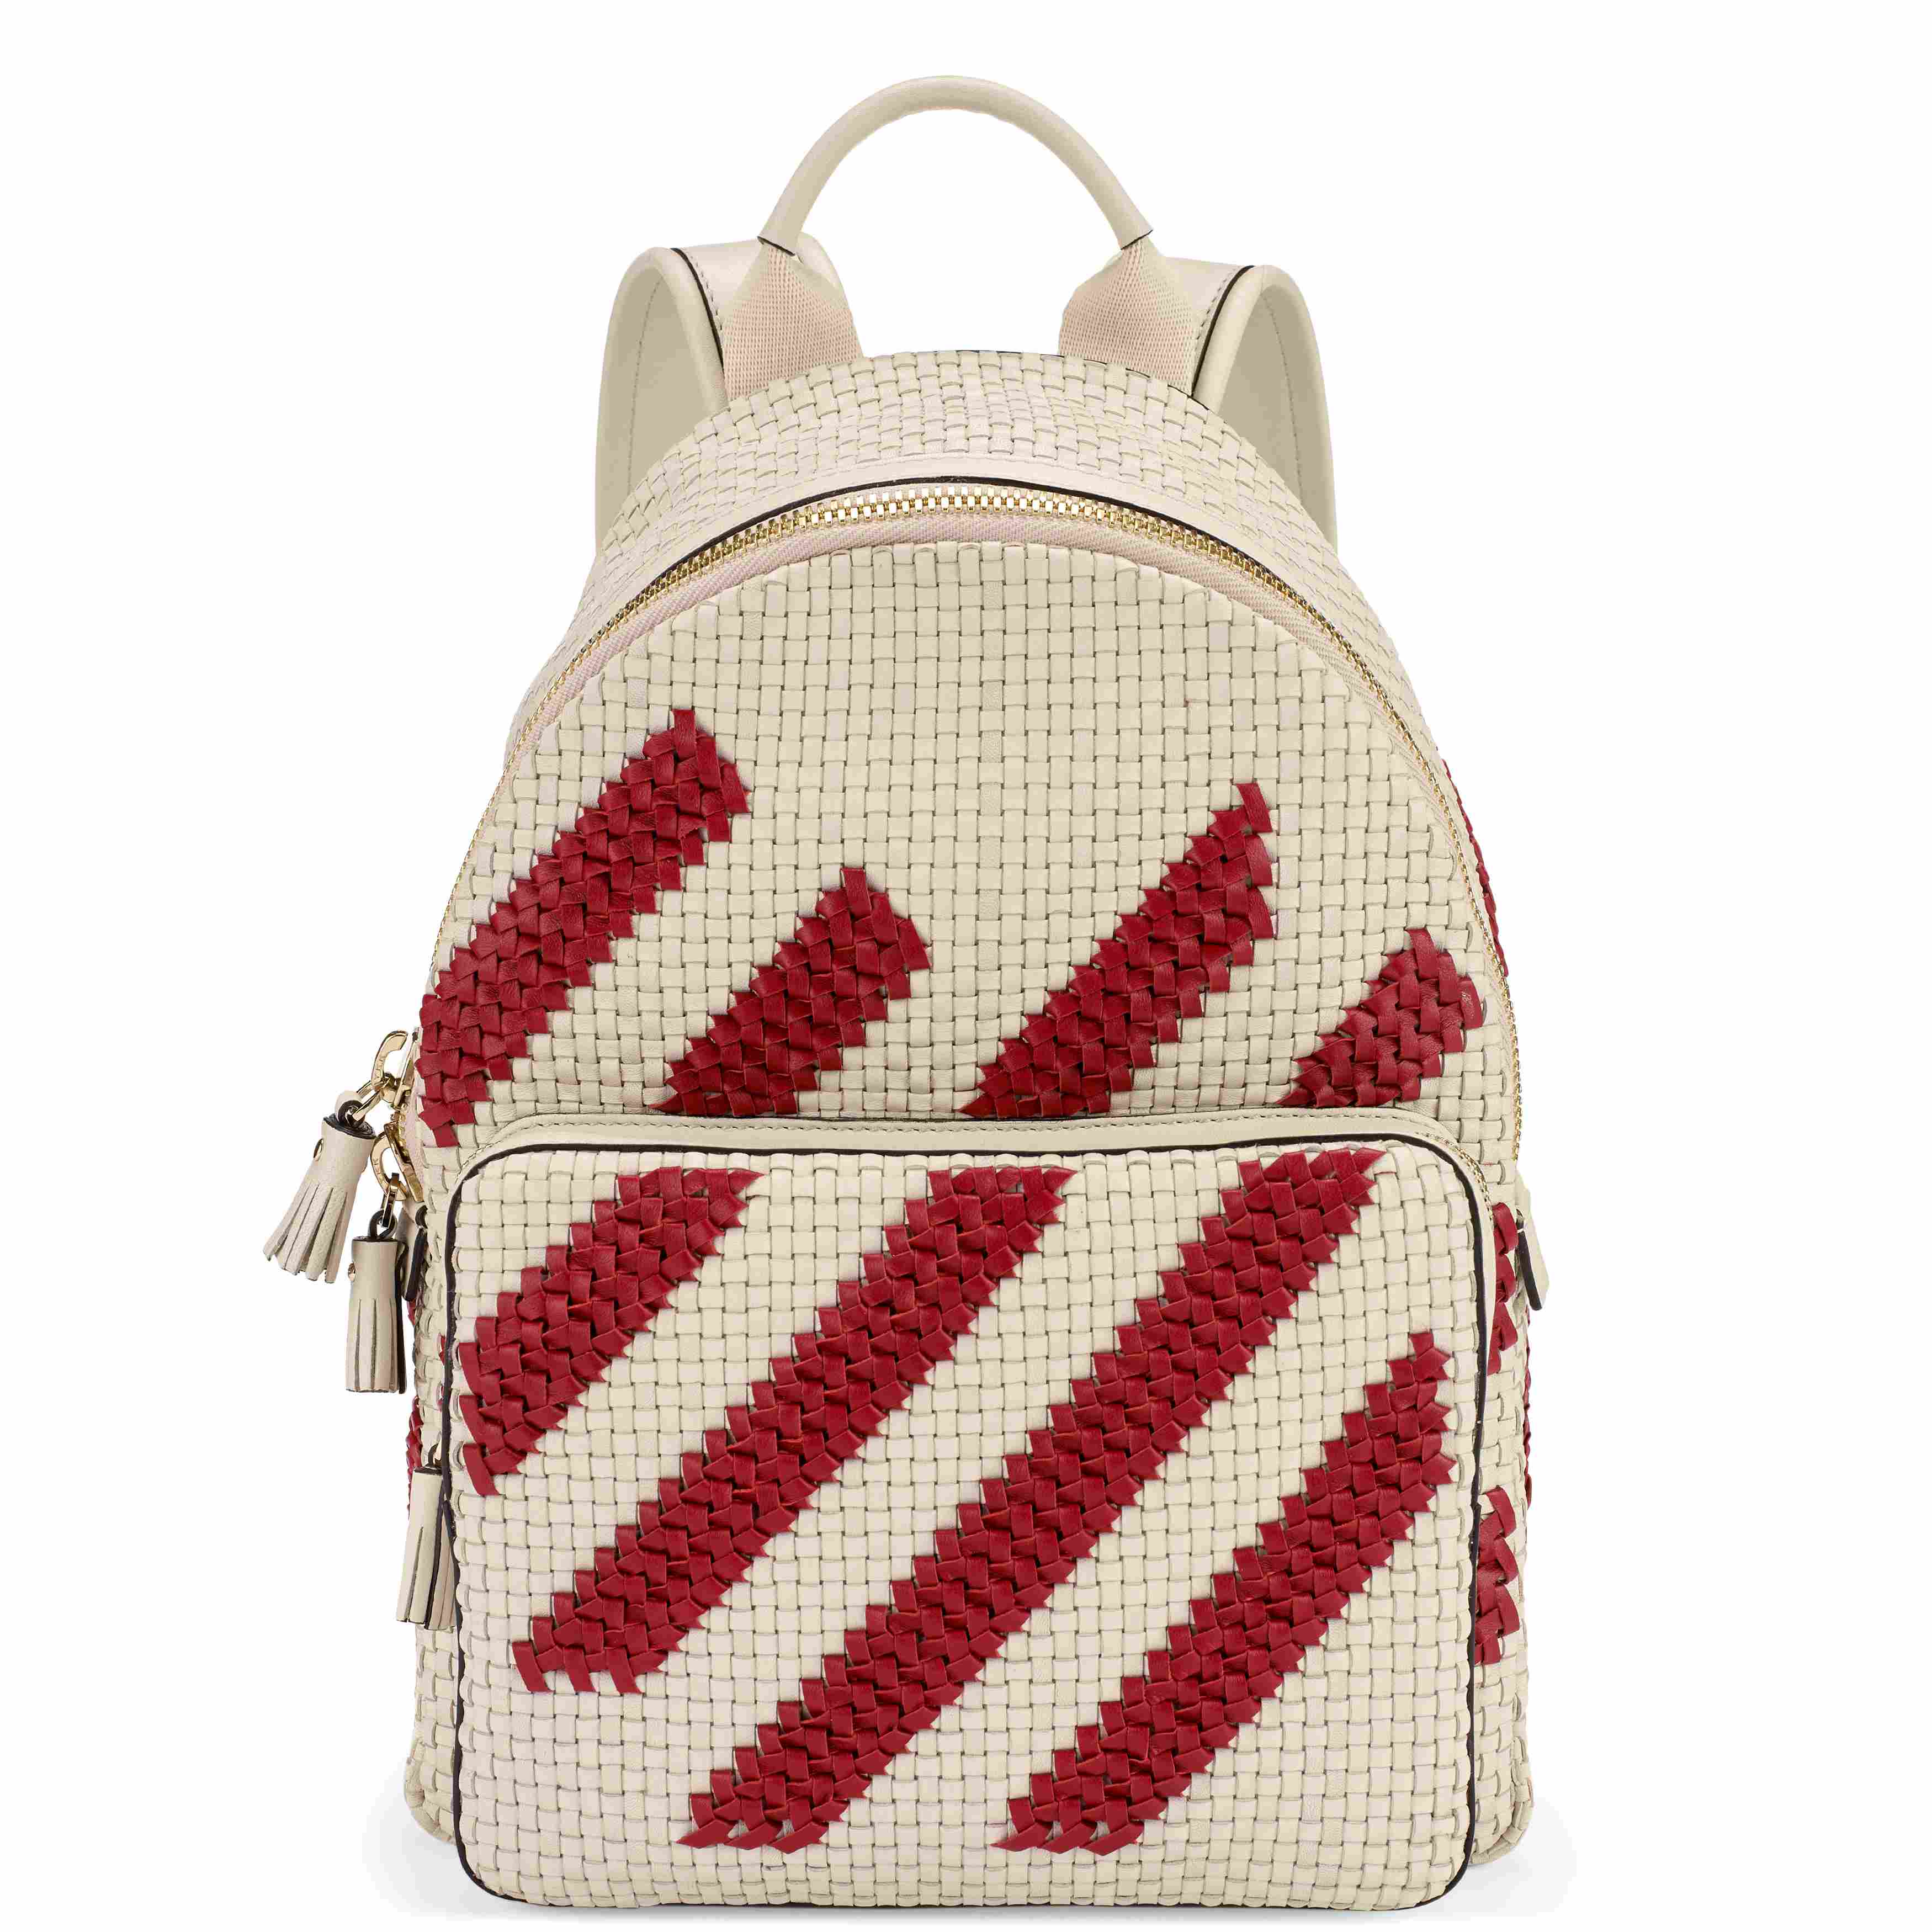 Backpack Mini Stripes in Chalk Vampire Woven Leather  1,395GBP, 1,695EUR, 2,350USD - Copy